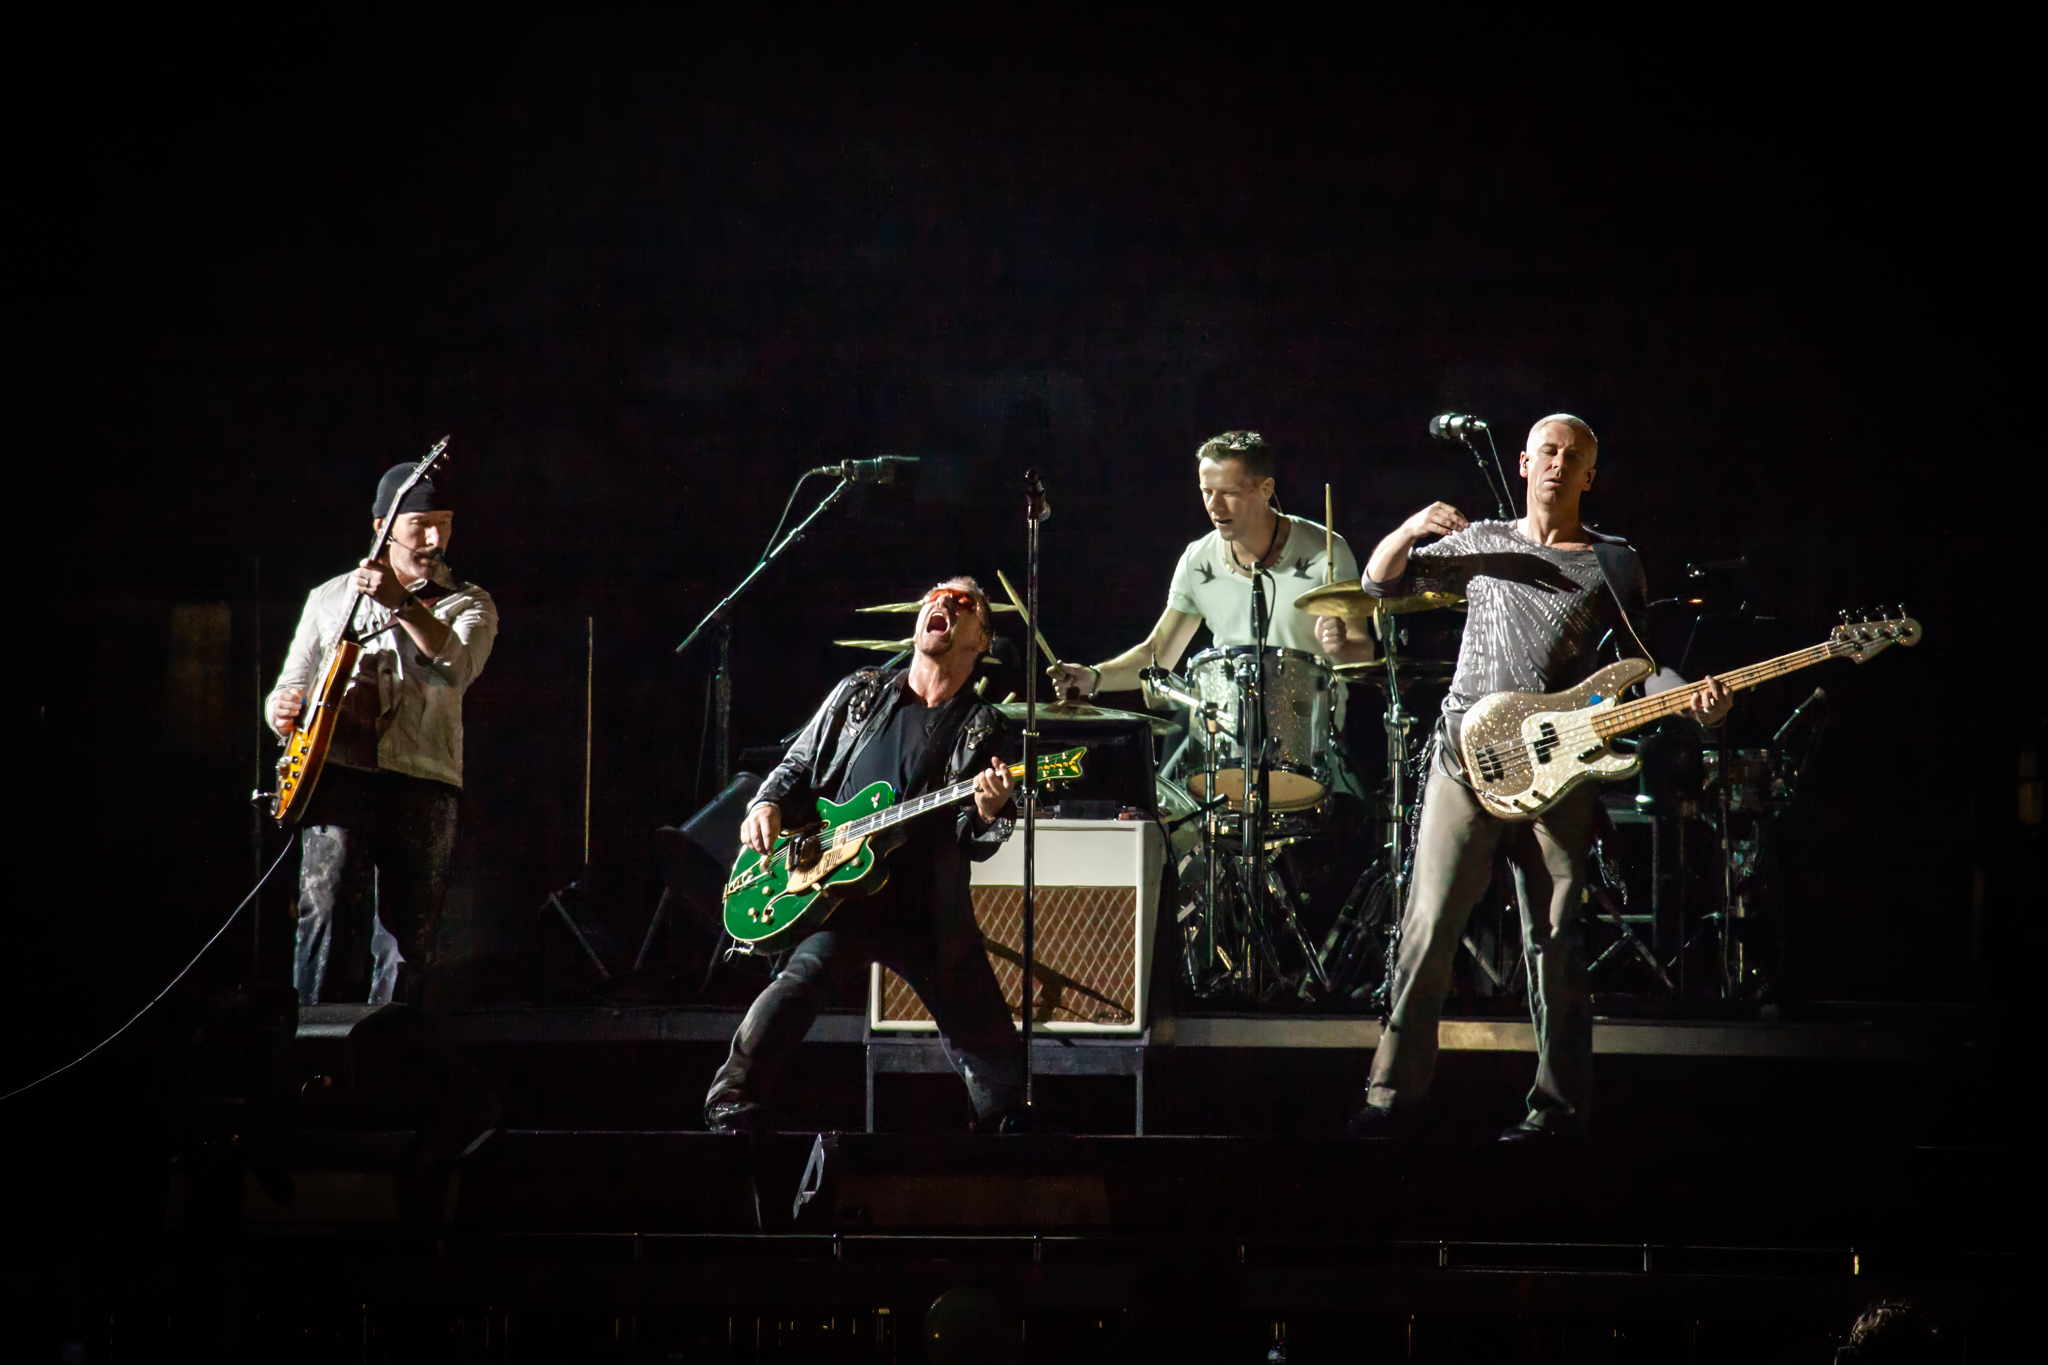 U2 by Bullet-ray Photography